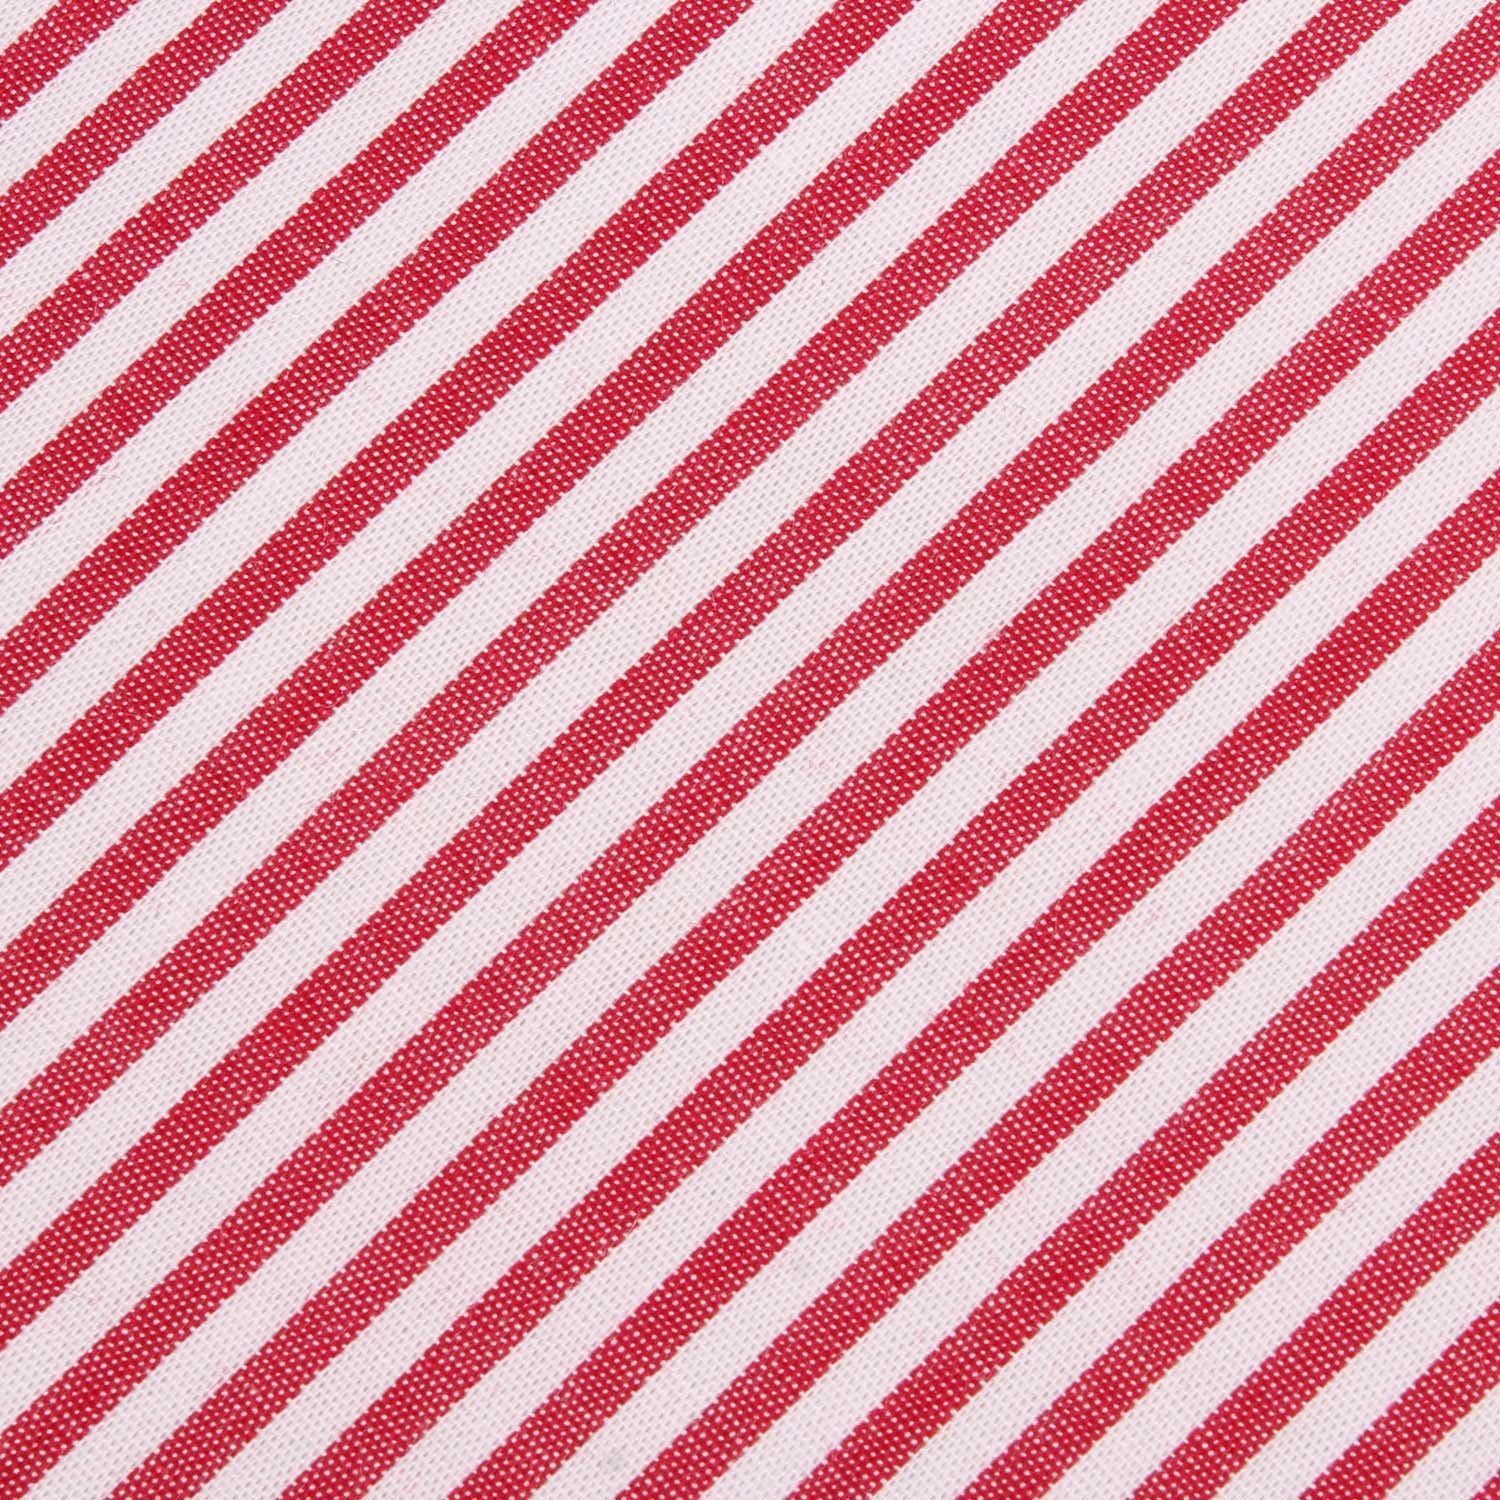 Red and White Chalk Stripe Cotton Fabric Bow Tie C005